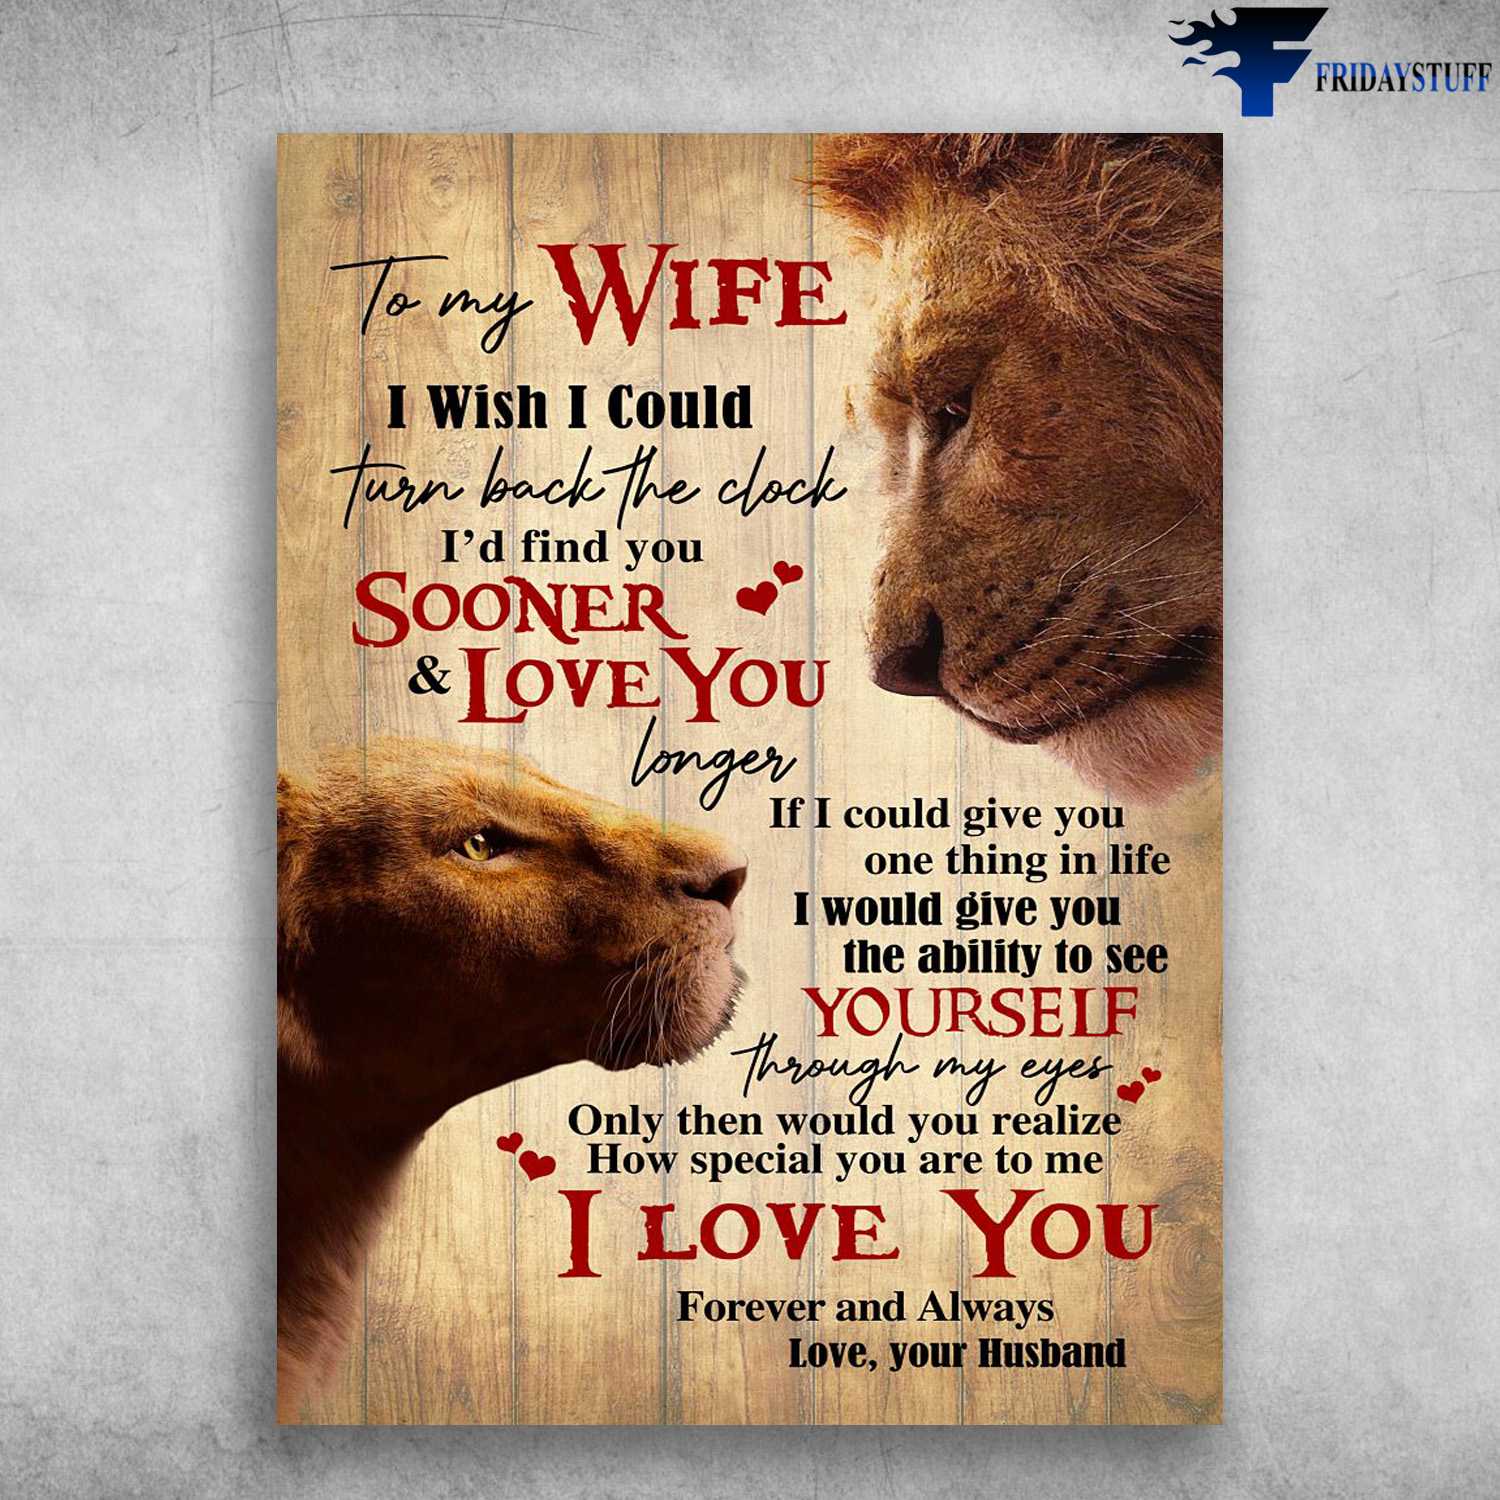 Lion Poster, Husband And Wife. I Wish I Could, Turn Back The Clock Sooner, And Love You Longer, If I Could Give You One Thing In Life, I Could Give You One Thing In life